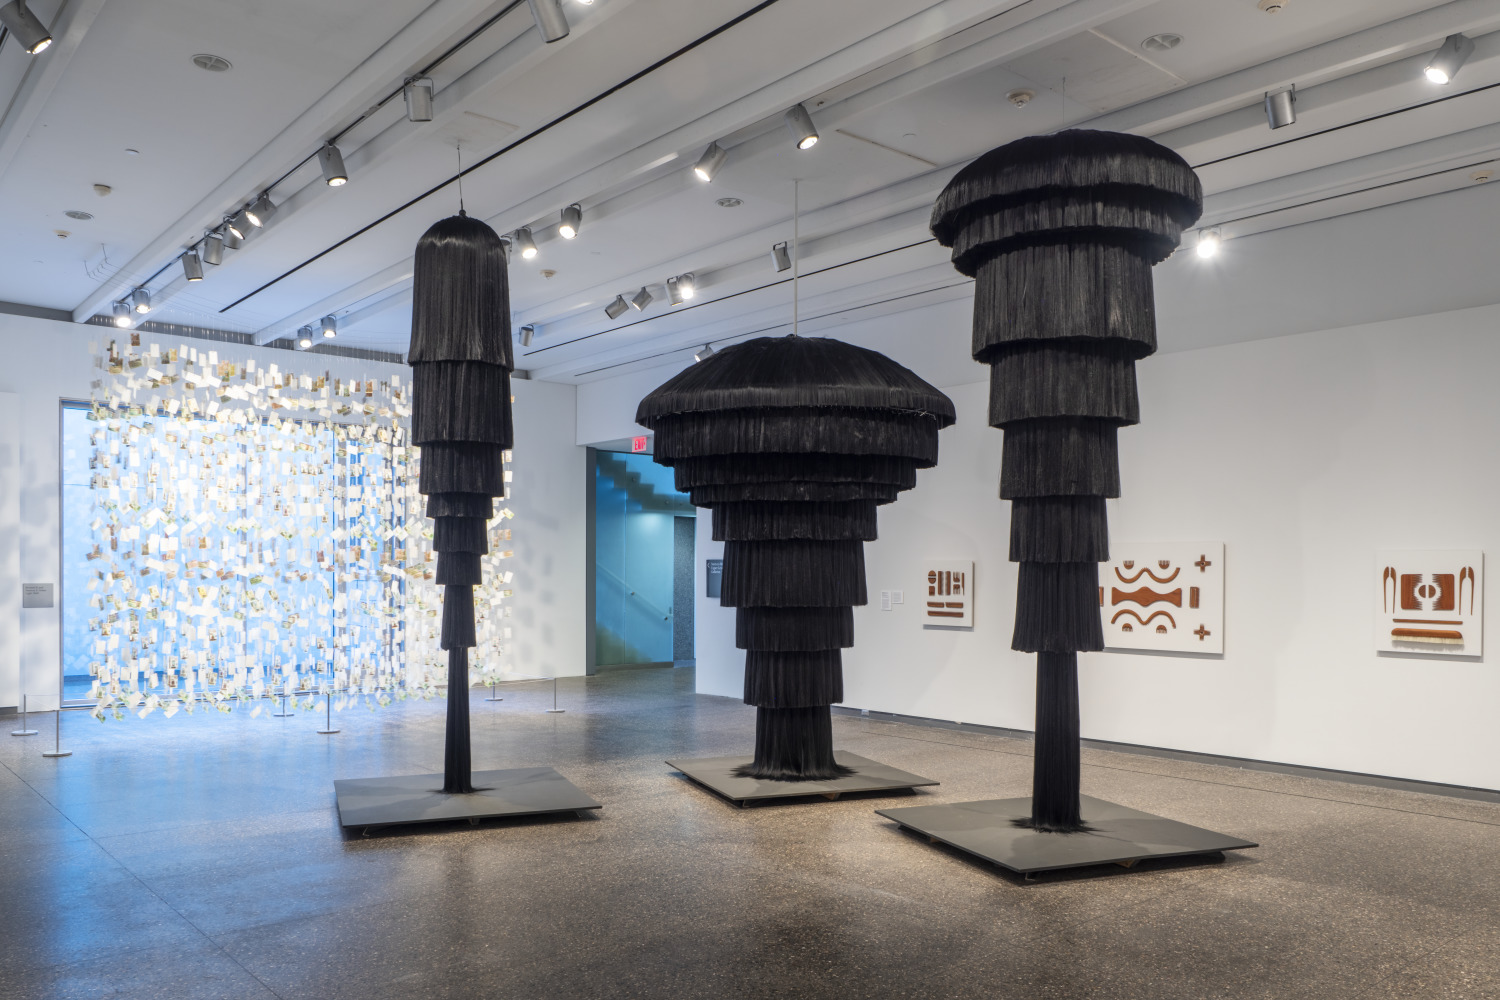 Sam Frésquez.and Merryn Omotayo Alaka, Kanekalon Forest, 2022. Kanekalon hair and clamps, steel, wire. Courtesy of the artists and Lisa Sette Gallery. Installation view, 2021 Lehmann Emerging Artist Awards Exhibition, 2022, Phoenix Art Museum.